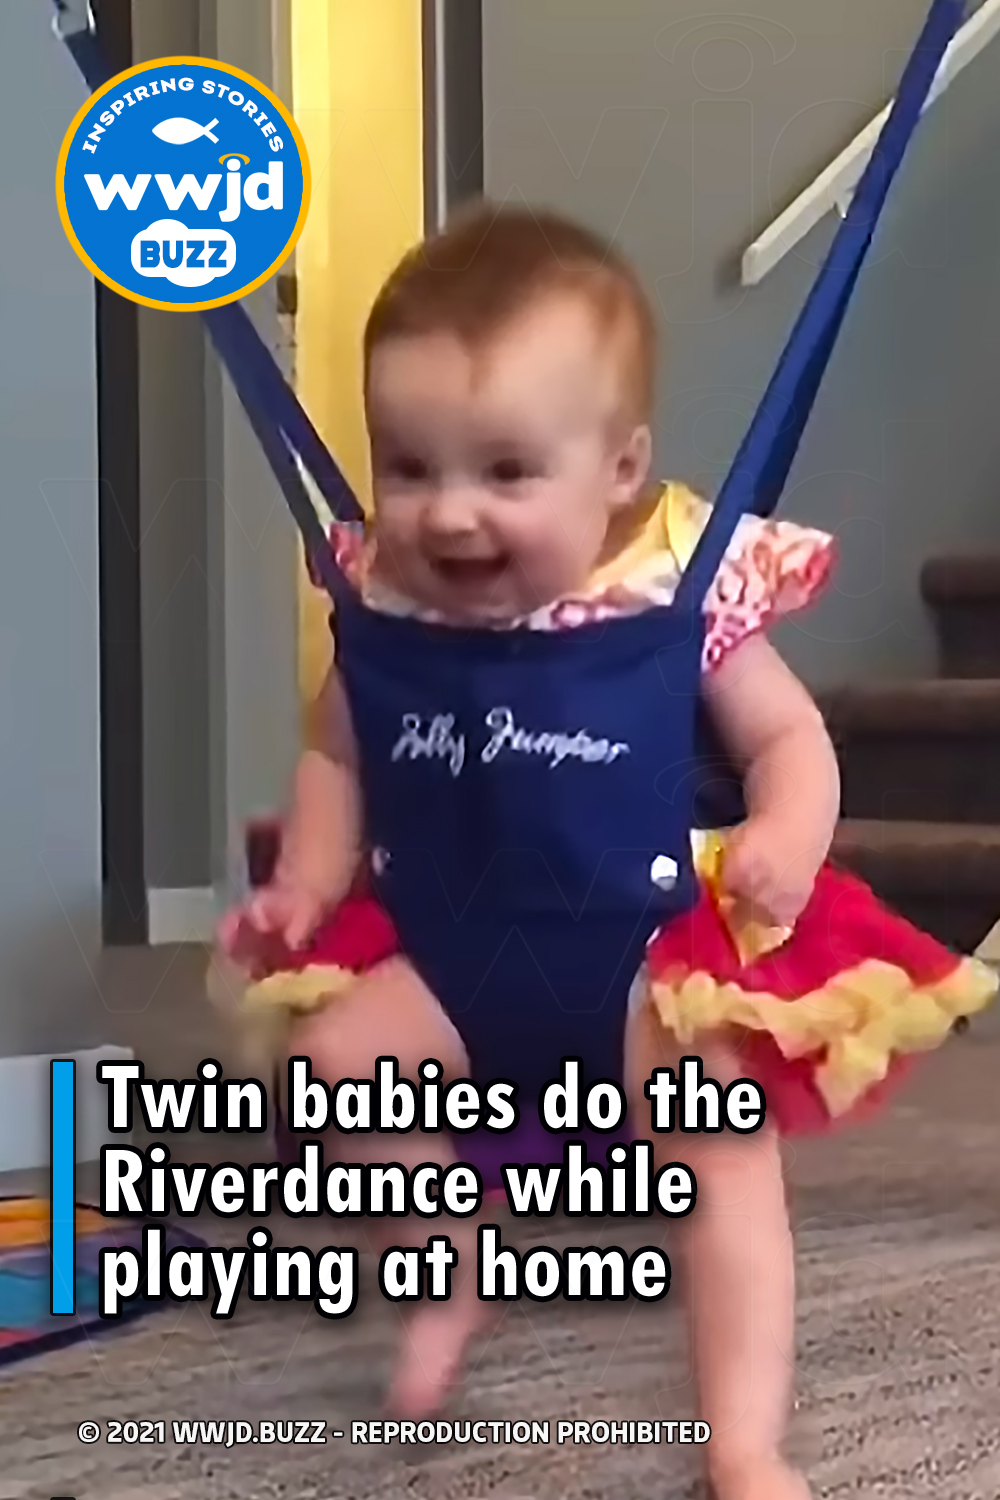 Twin babies do the Riverdance while playing at home